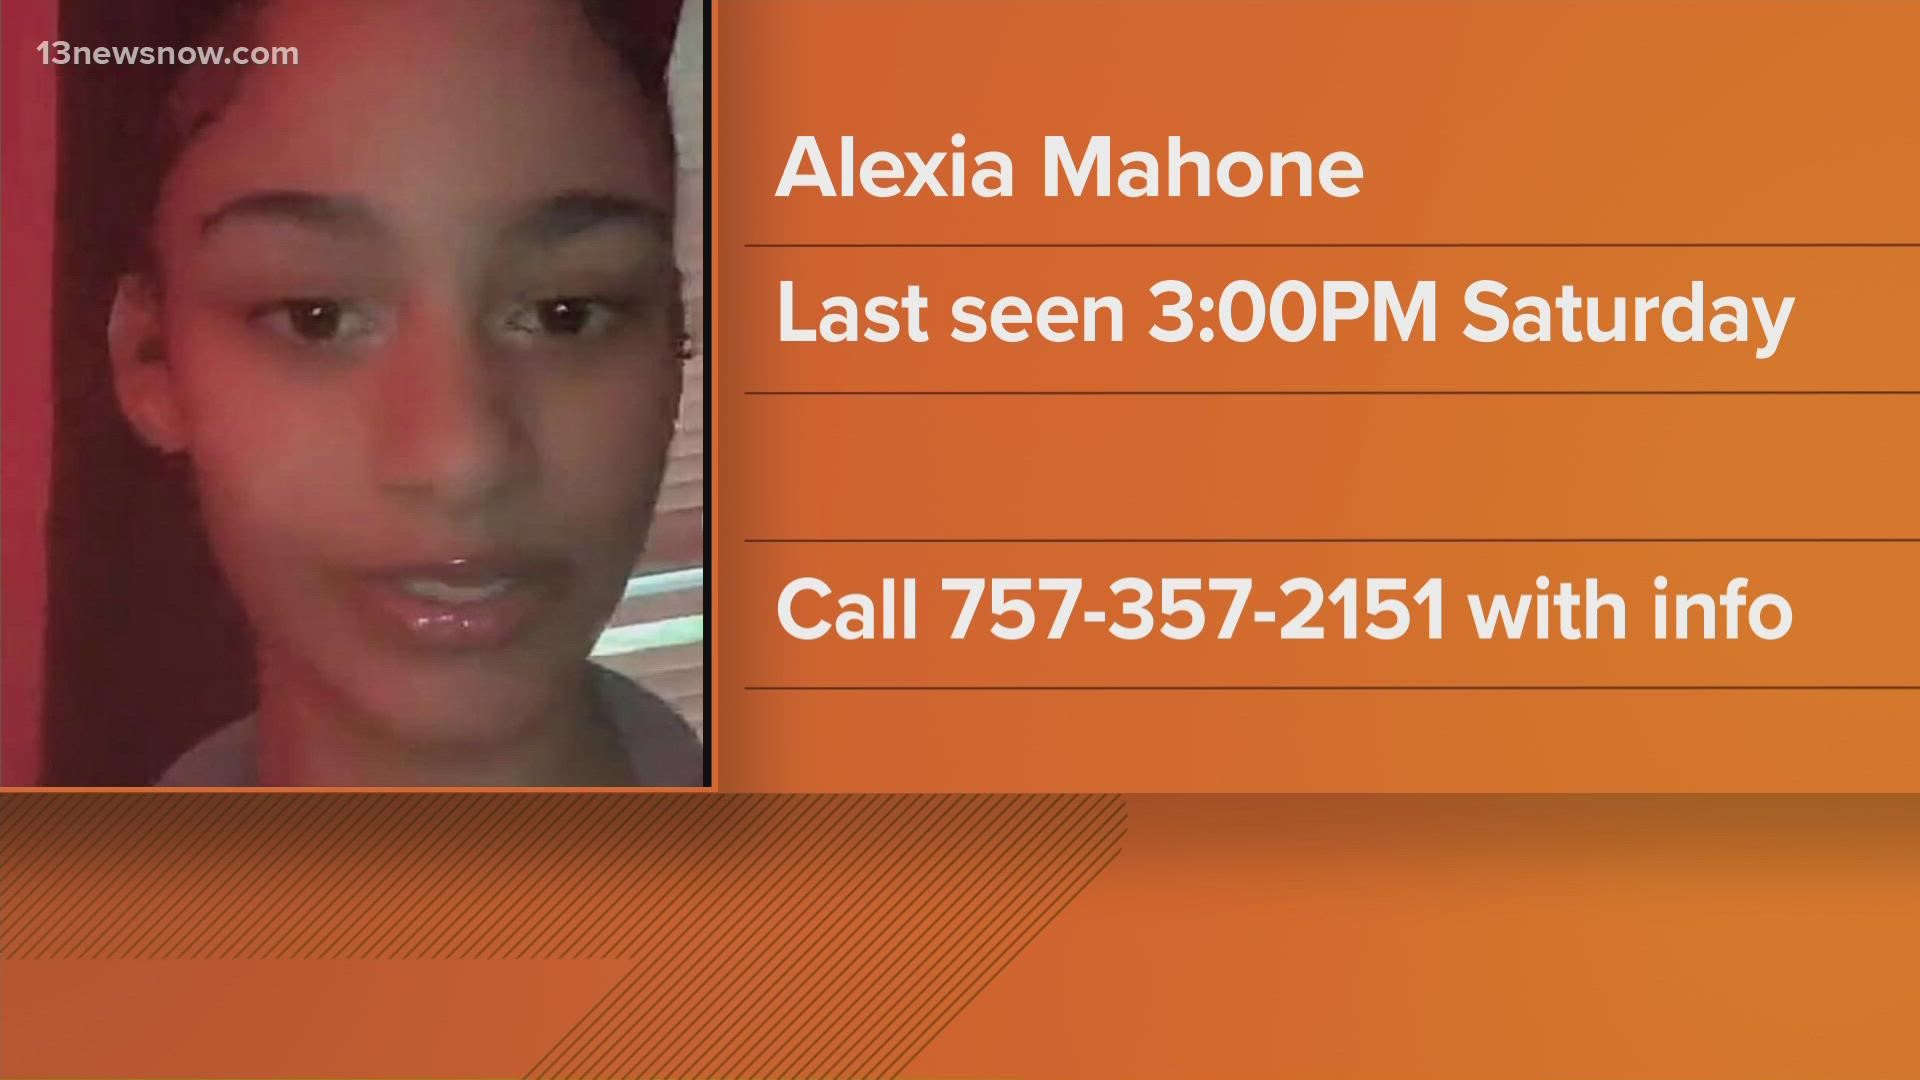 Alexis "Lexi" Mahone was last seen on August 6. If you know where she may be, call the police.